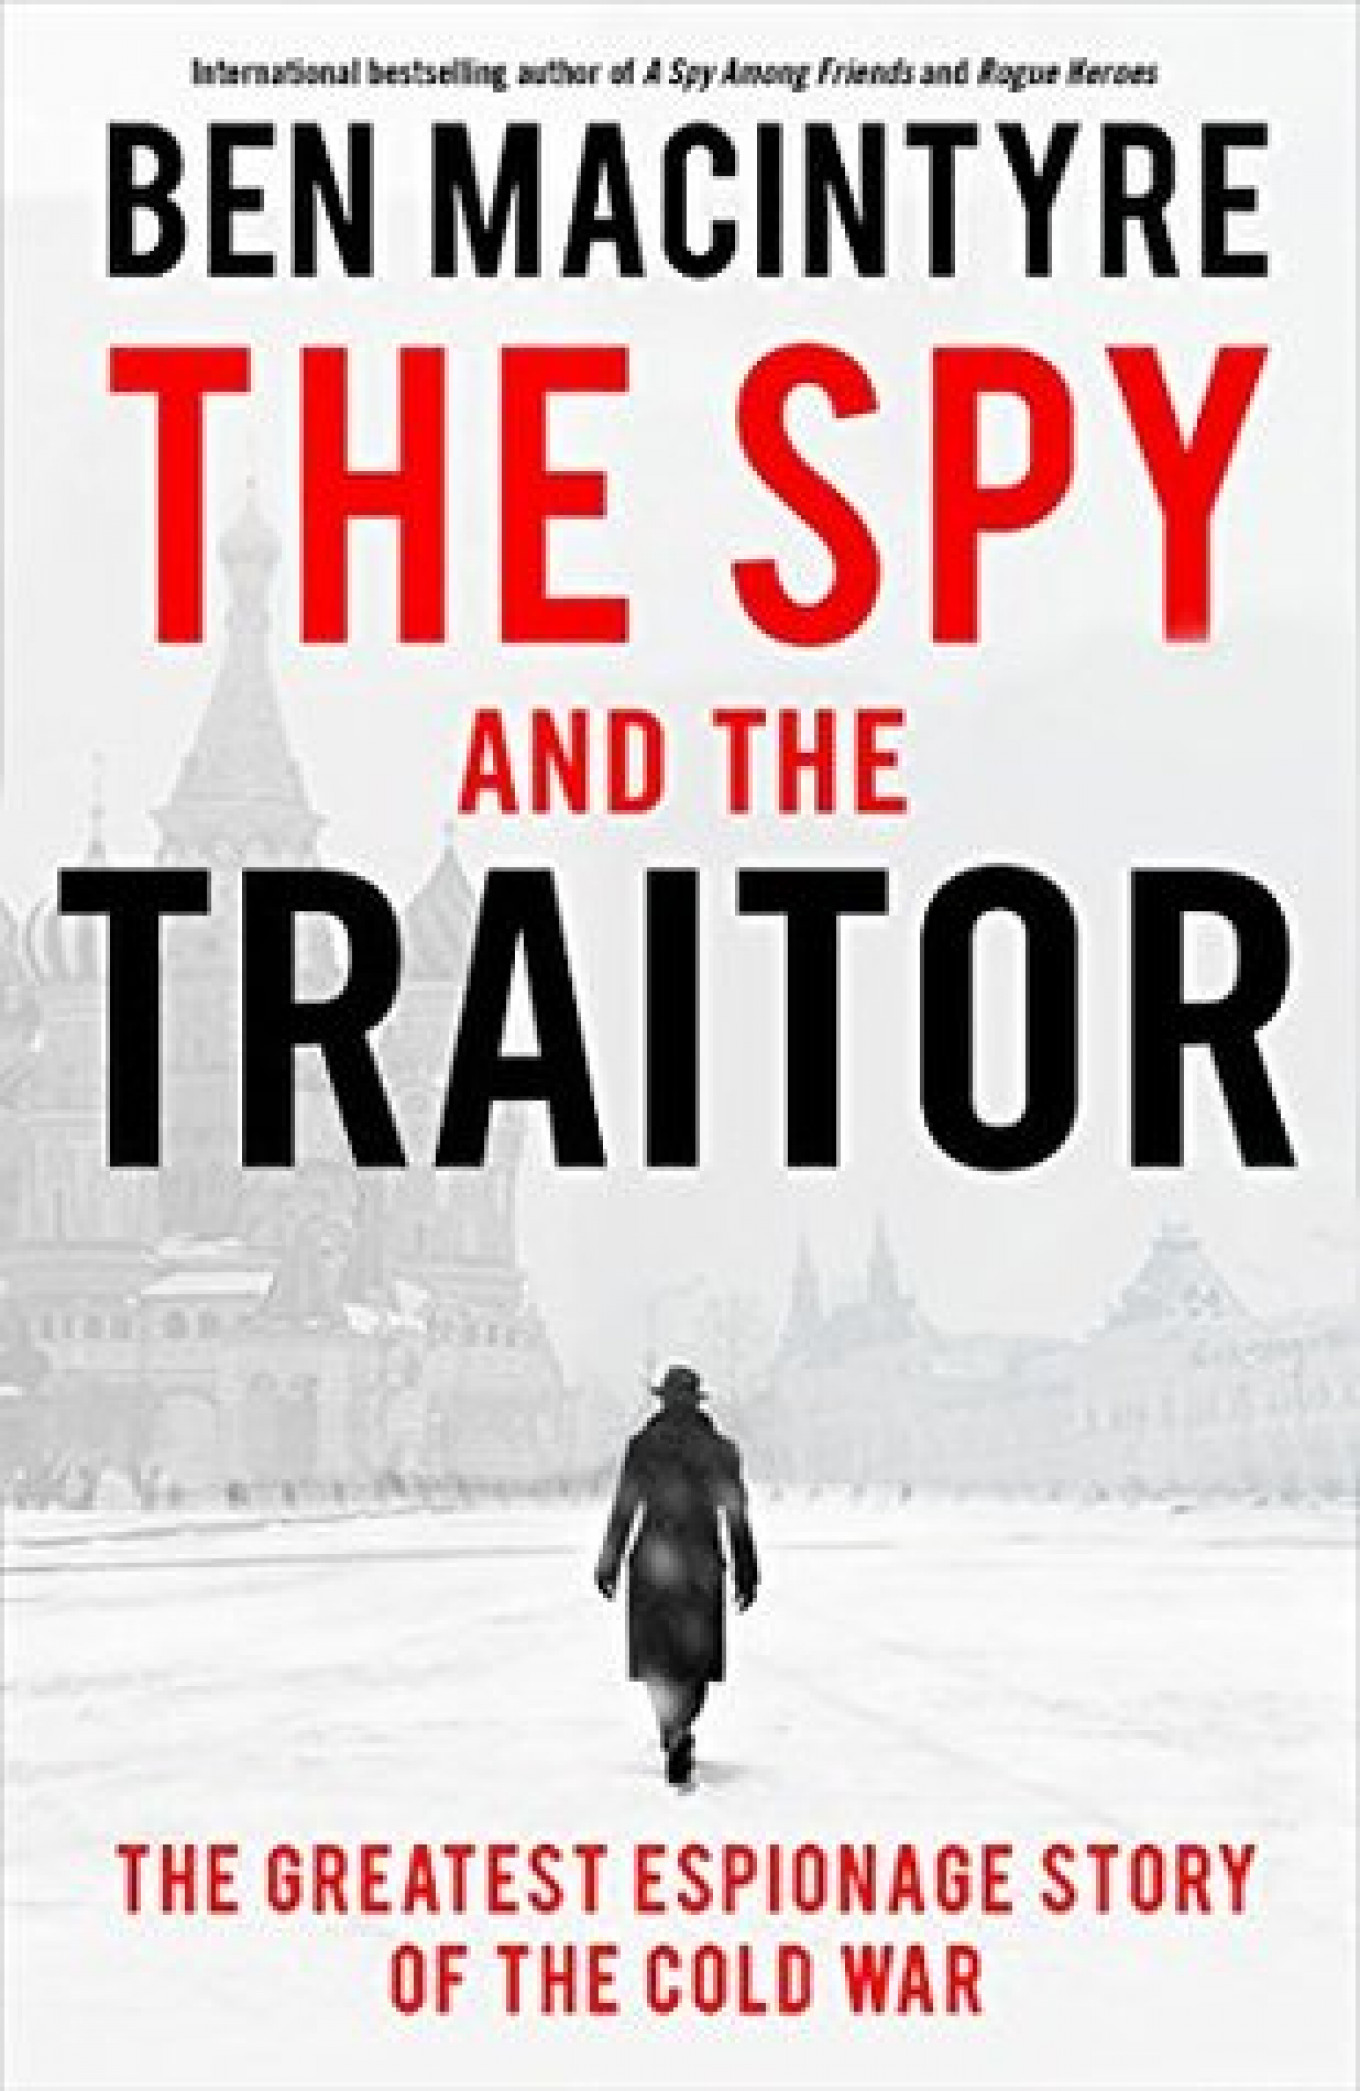 The Tale Of The Spy And The Traitor The Moscow Times